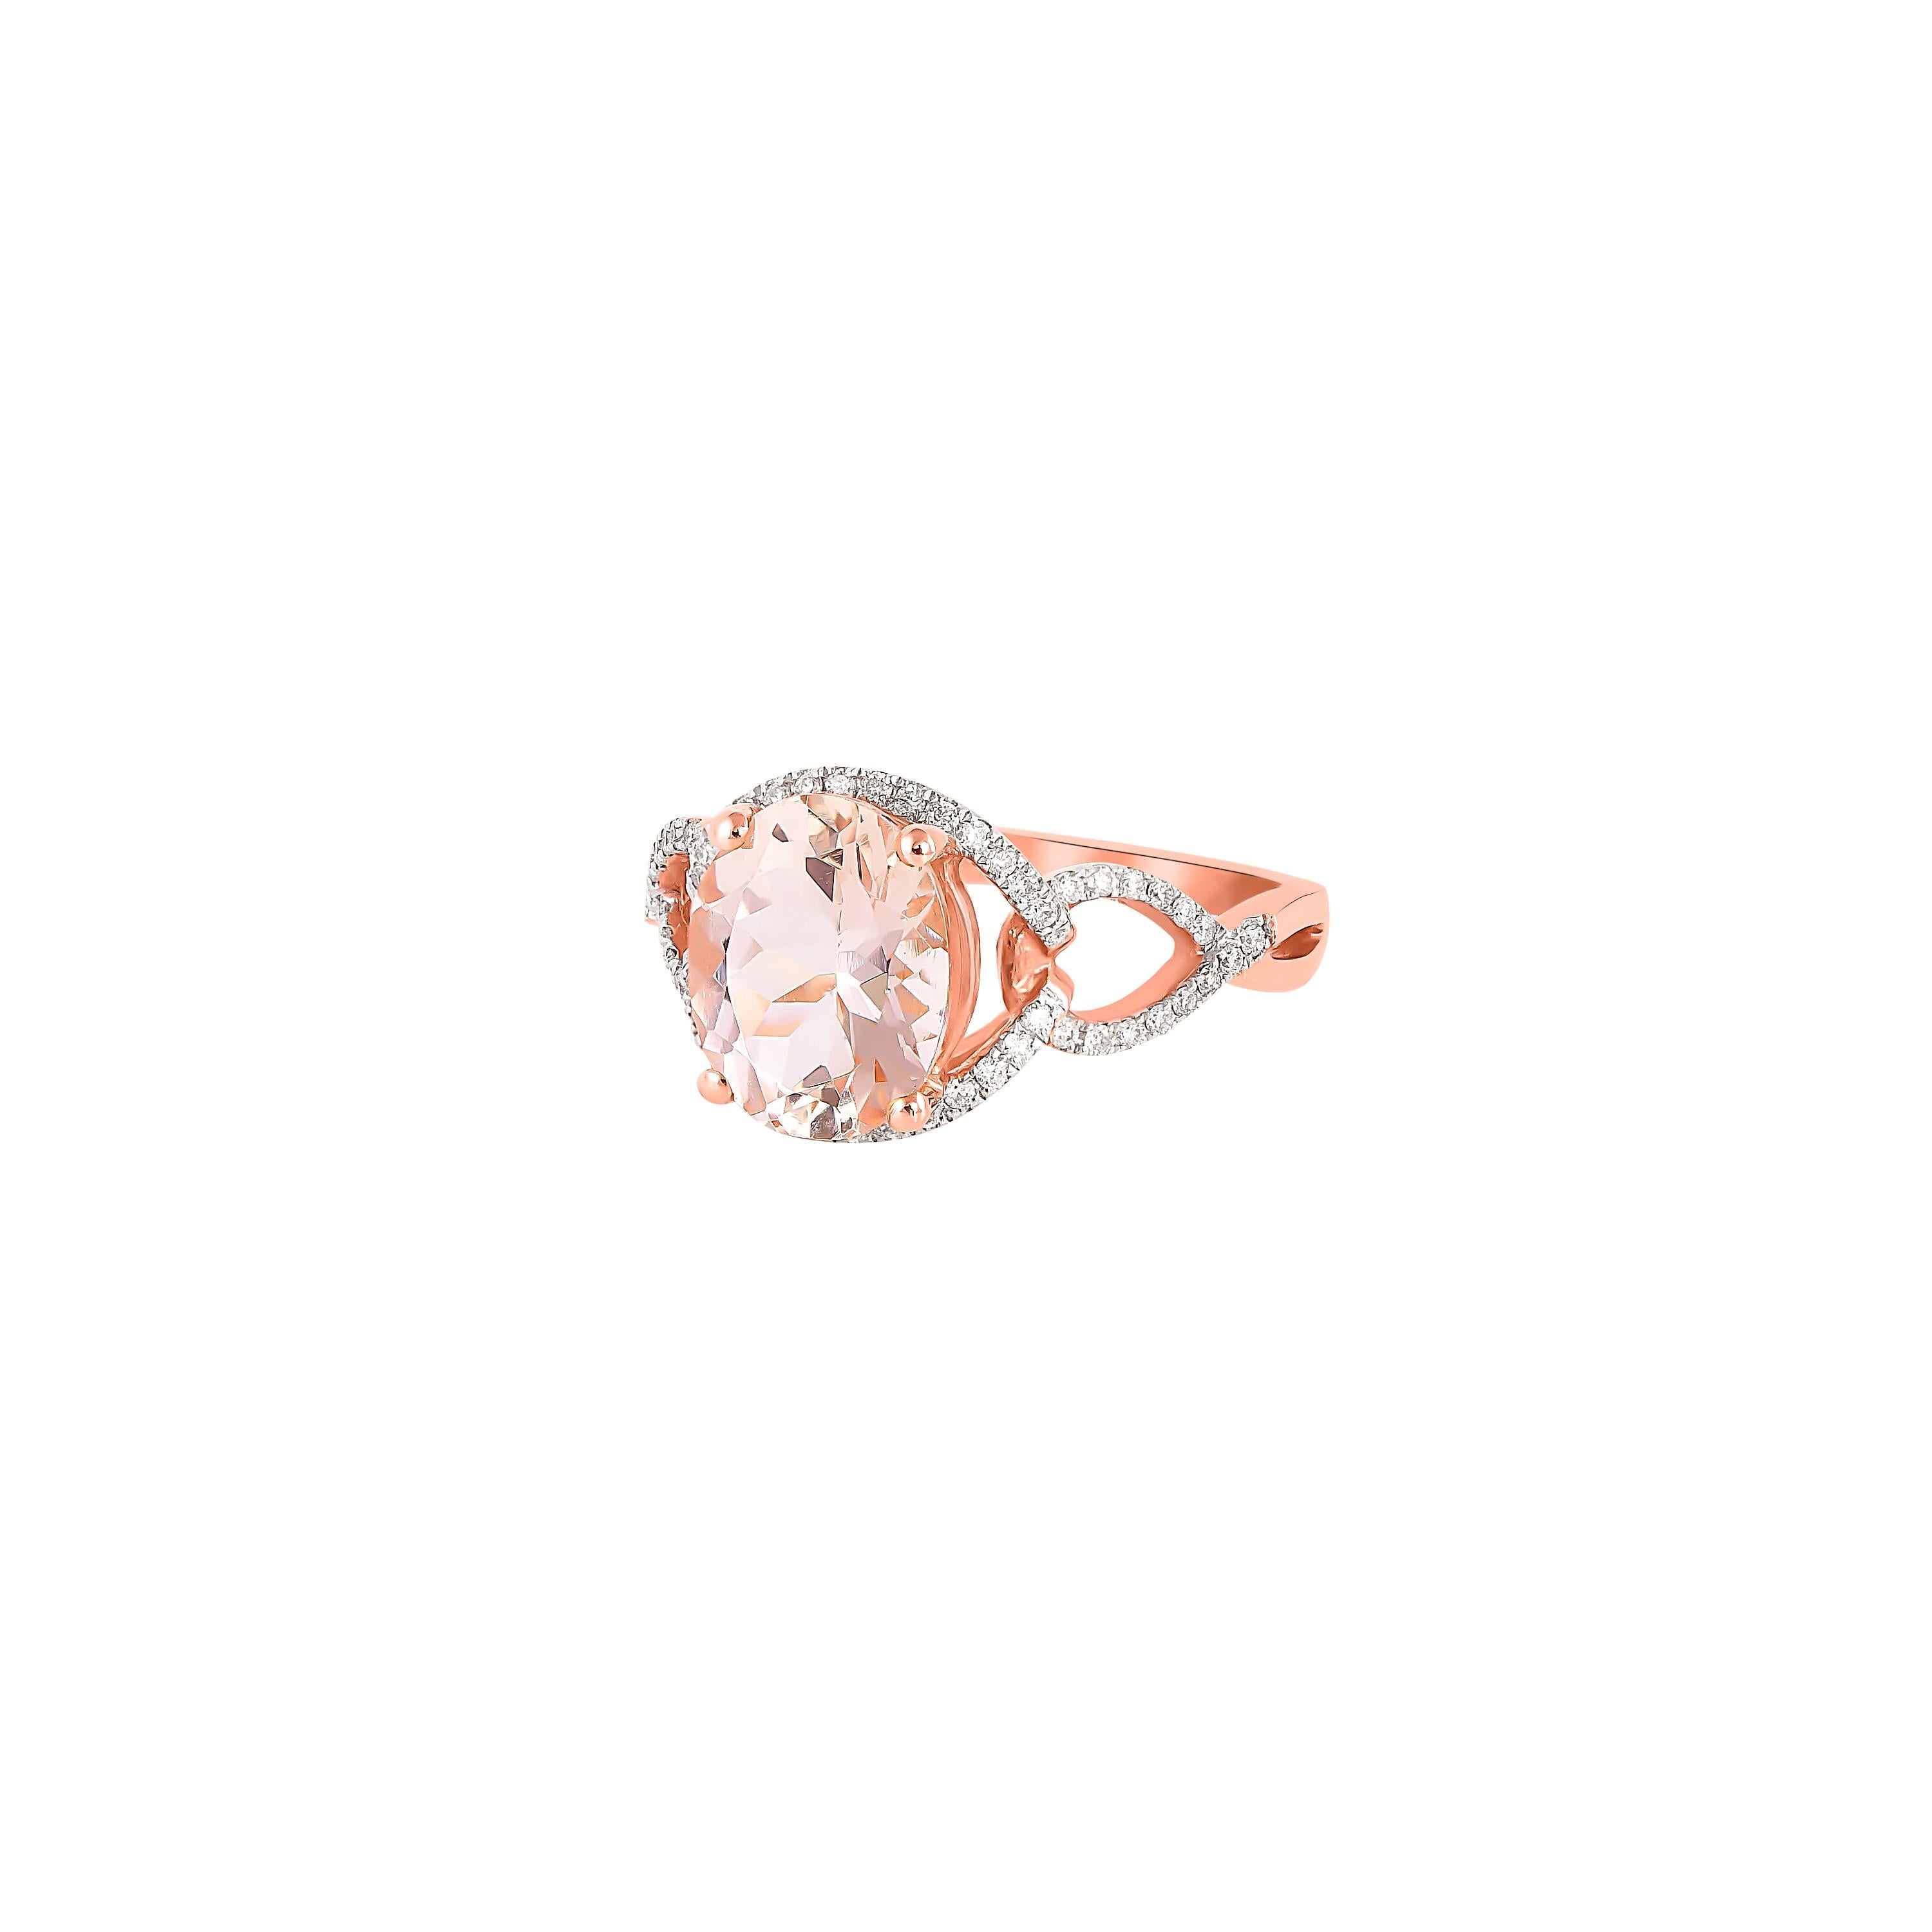 Oval Cut 2.37 Carat Morganite and Diamond Ring in 18 Karat Rose Gold For Sale